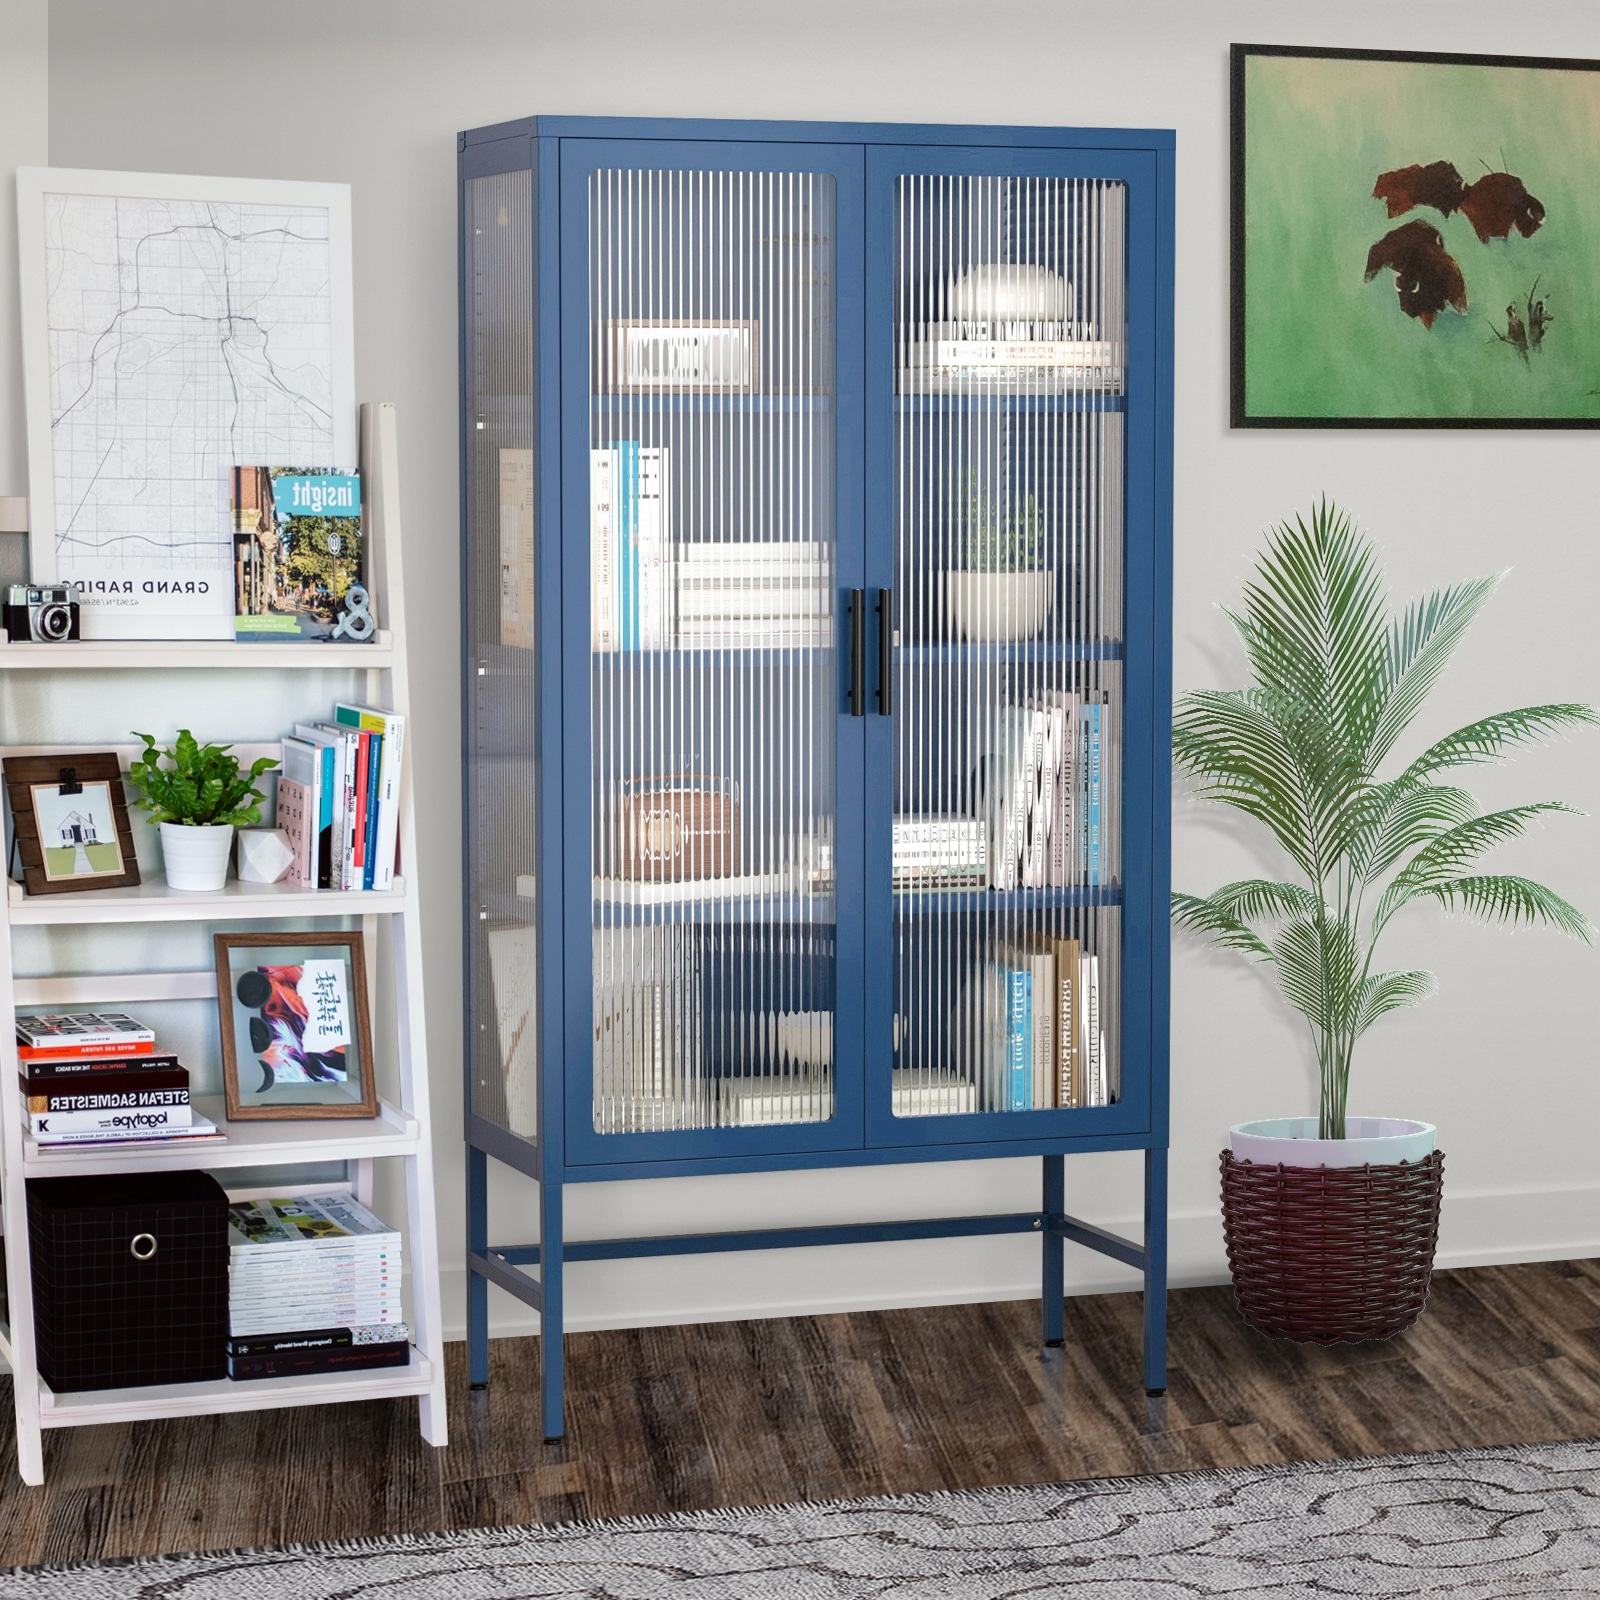 https://ak1.ostkcdn.com/images/products/is/images/direct/16cc357581d83d12c408f89fda9e6e3a485e9afd/61%22tall-Double-Glass-Door-Storage-Cabinet-with-Adjustable-Shelves.jpg